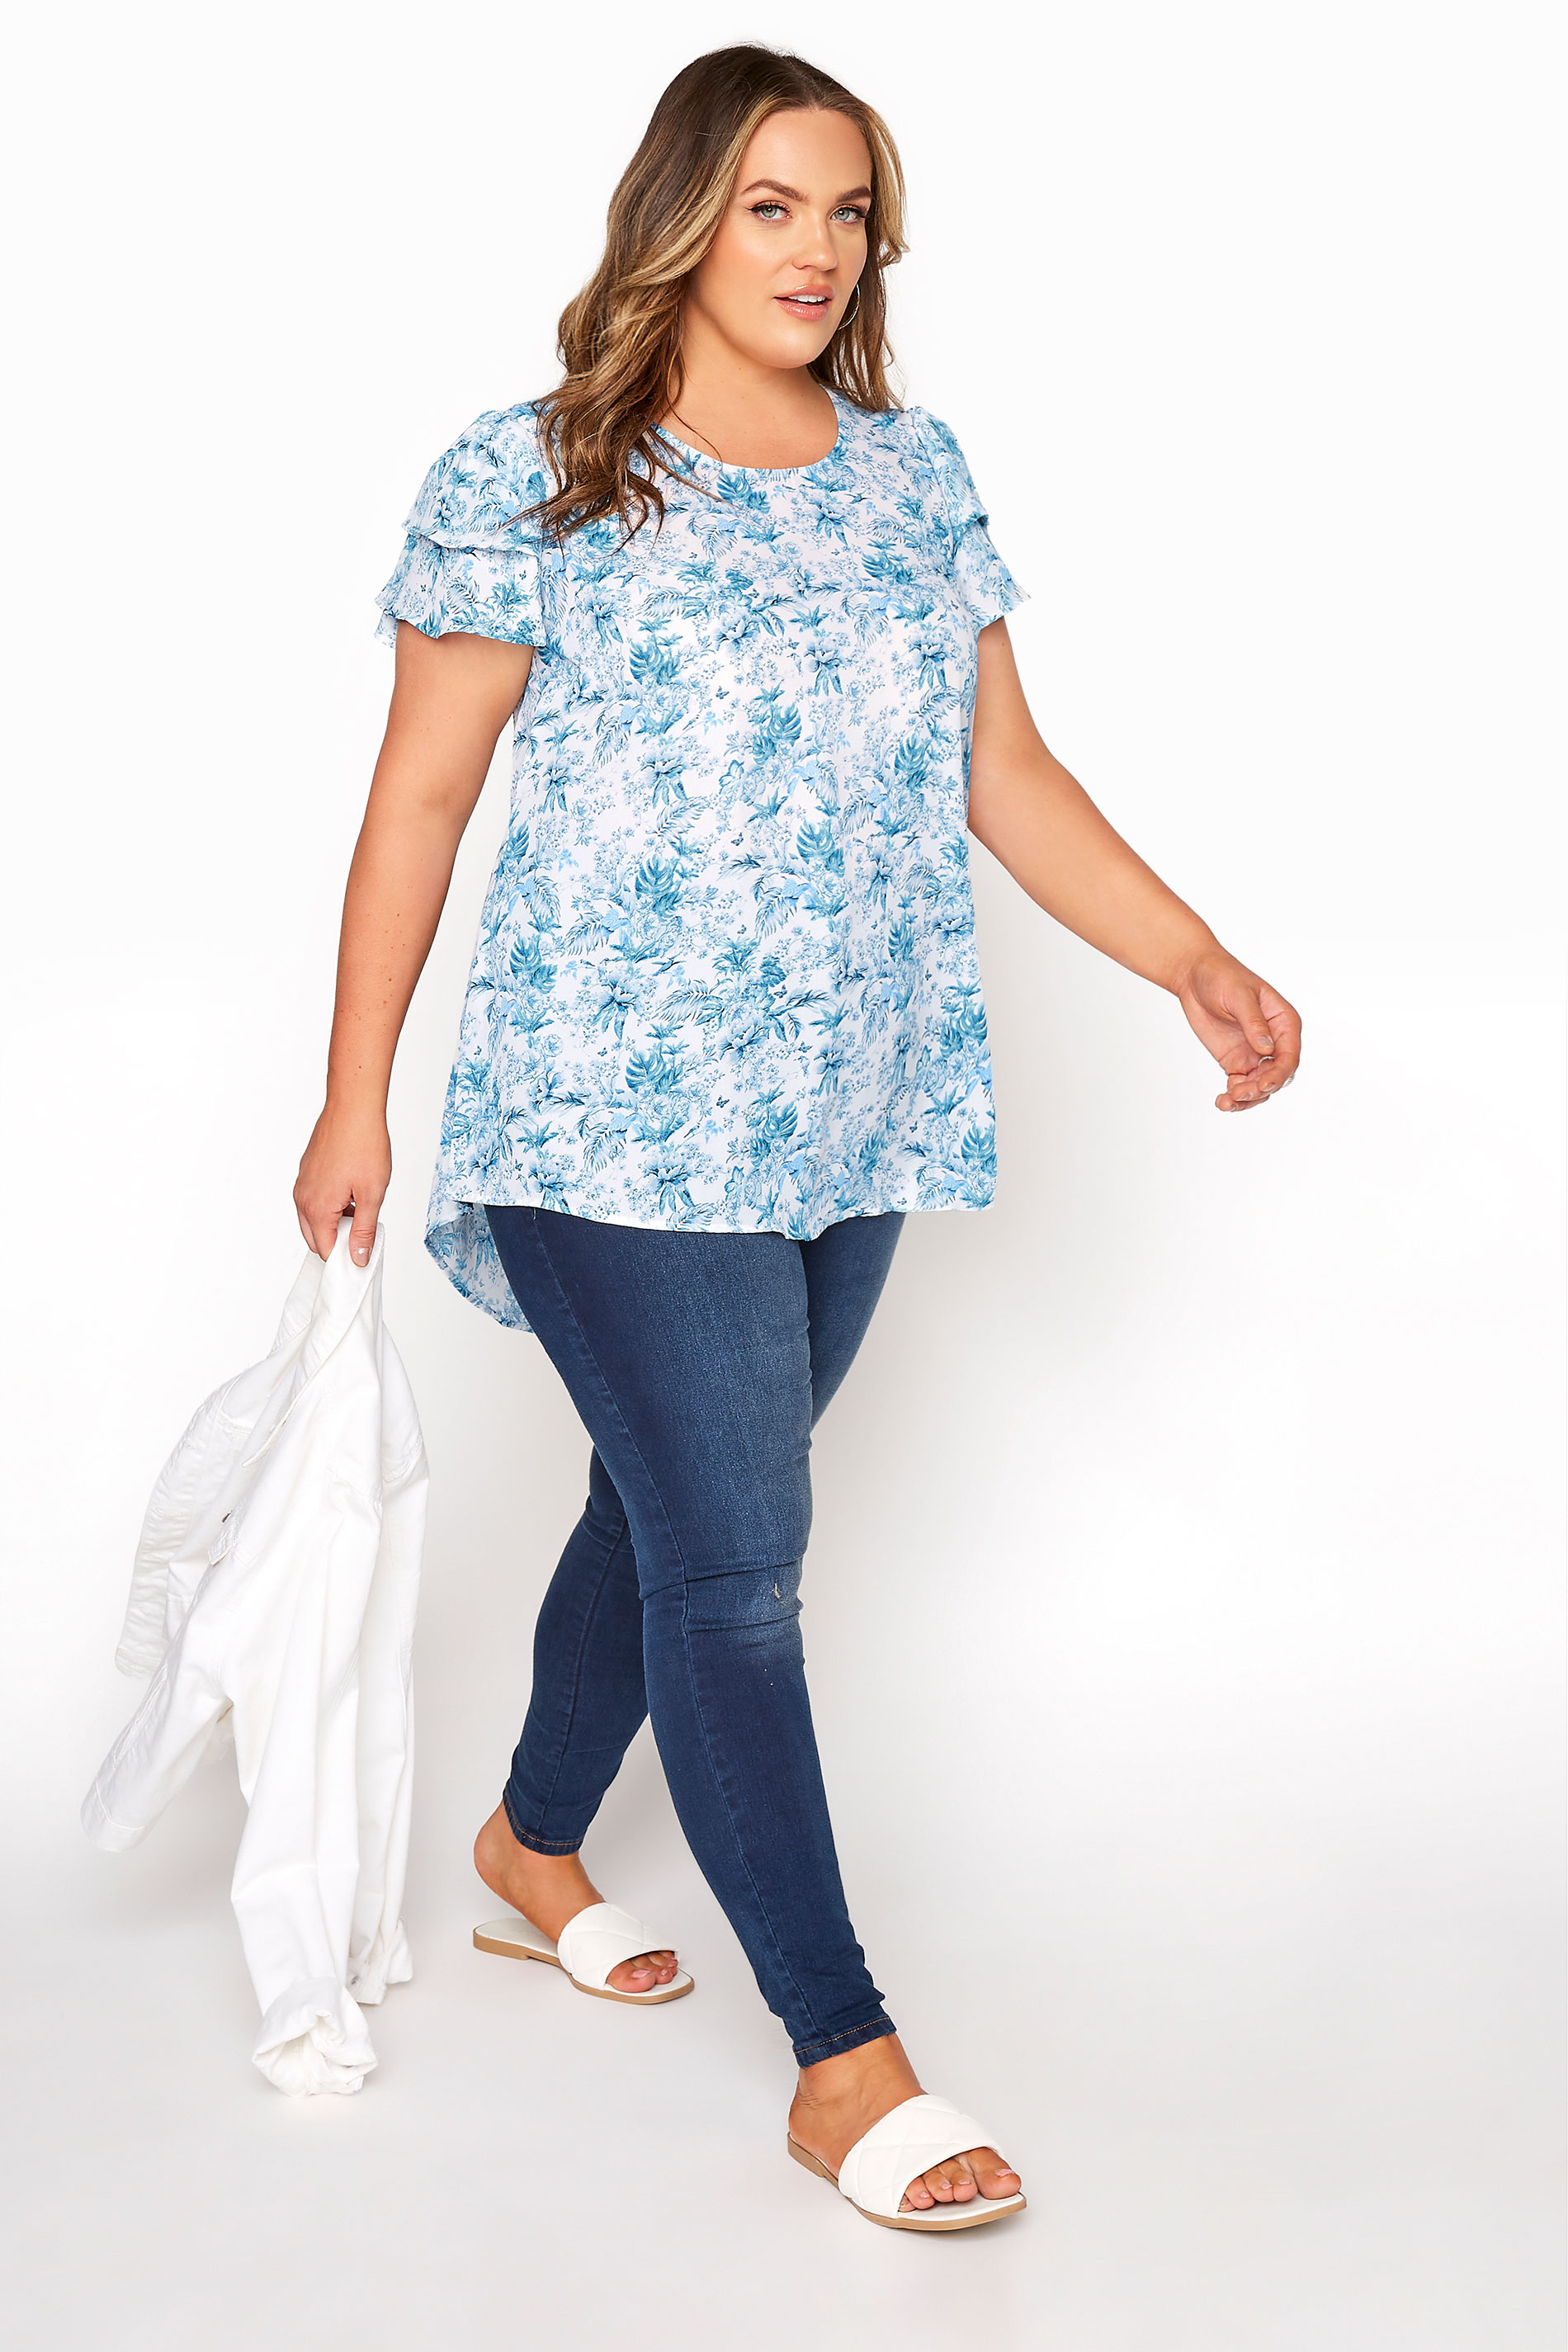 Grande taille  Tops Grande taille  Tops Casual | Blouse Blanche Floral Tropical Ourlet Plongeant - TH50210